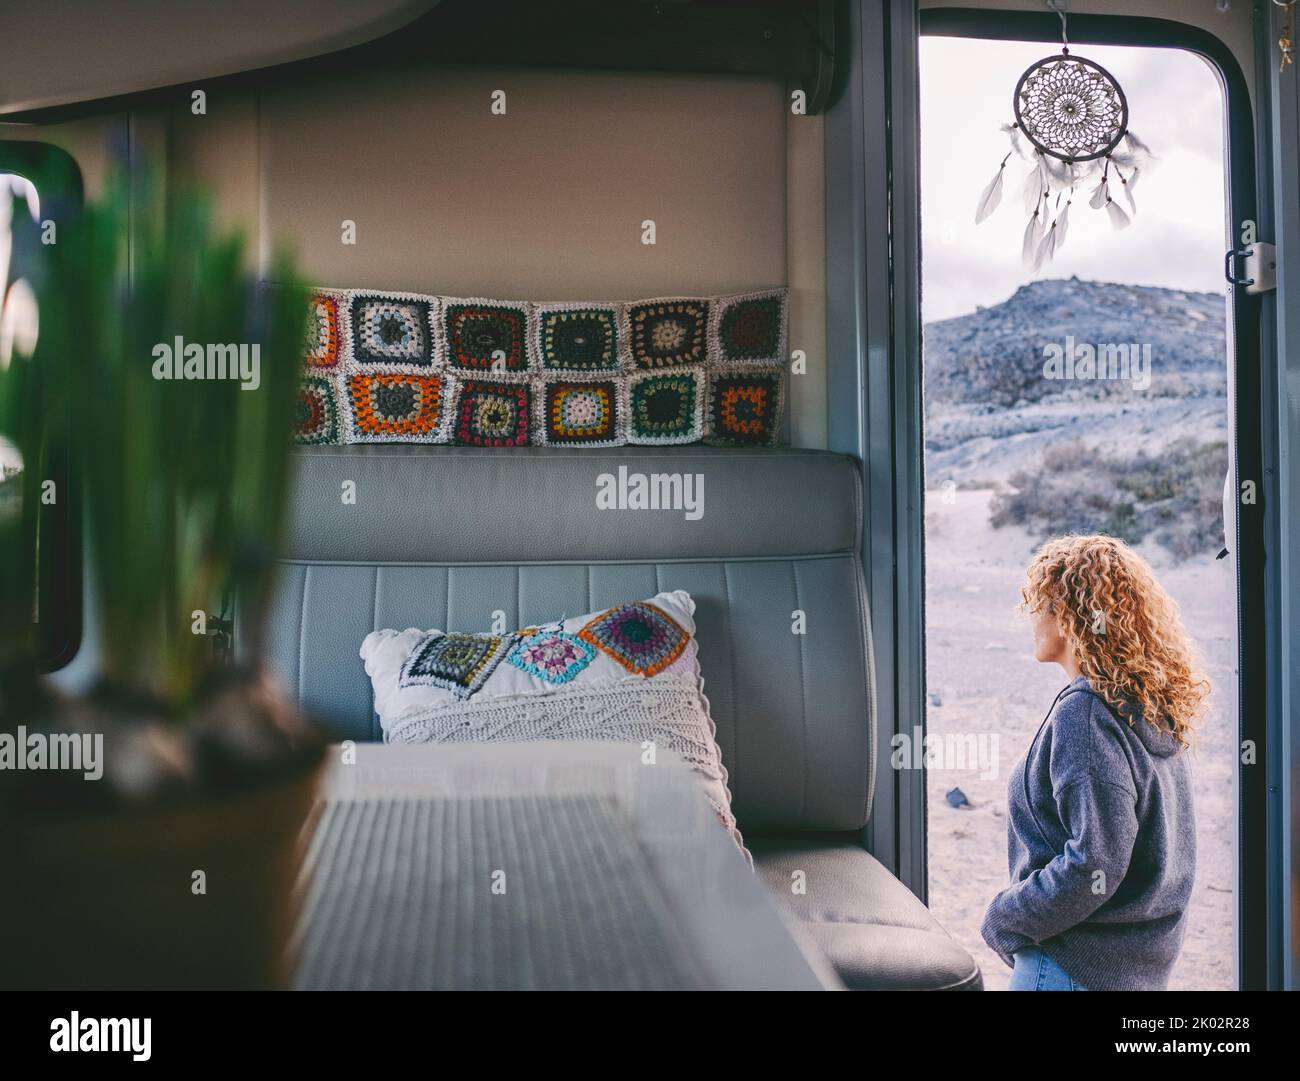 Woman walking outside her camper van. View from interior. Knit decorations inside. Concept of travel and rv motorhome vanlife lifestyle with traveler female people enjoying outdoors Stock Photo